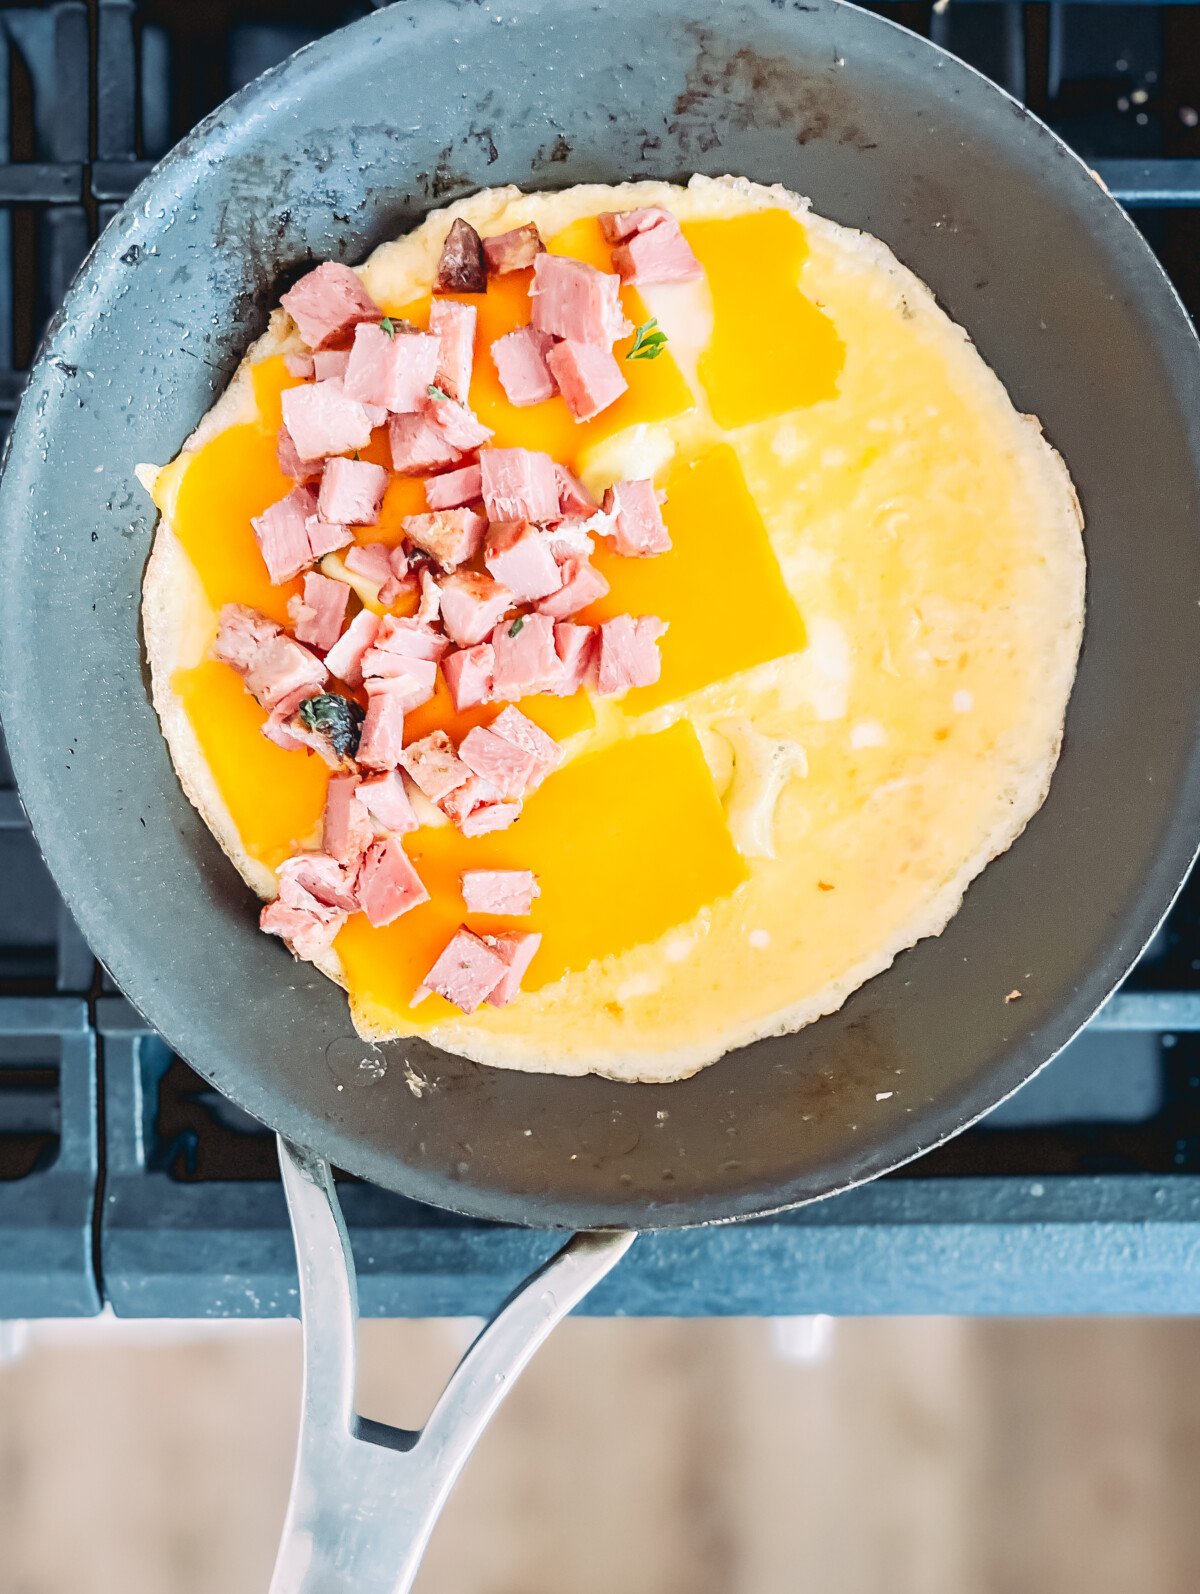 omelet being made in a skillet with cheese and ham on one side as egg sets.